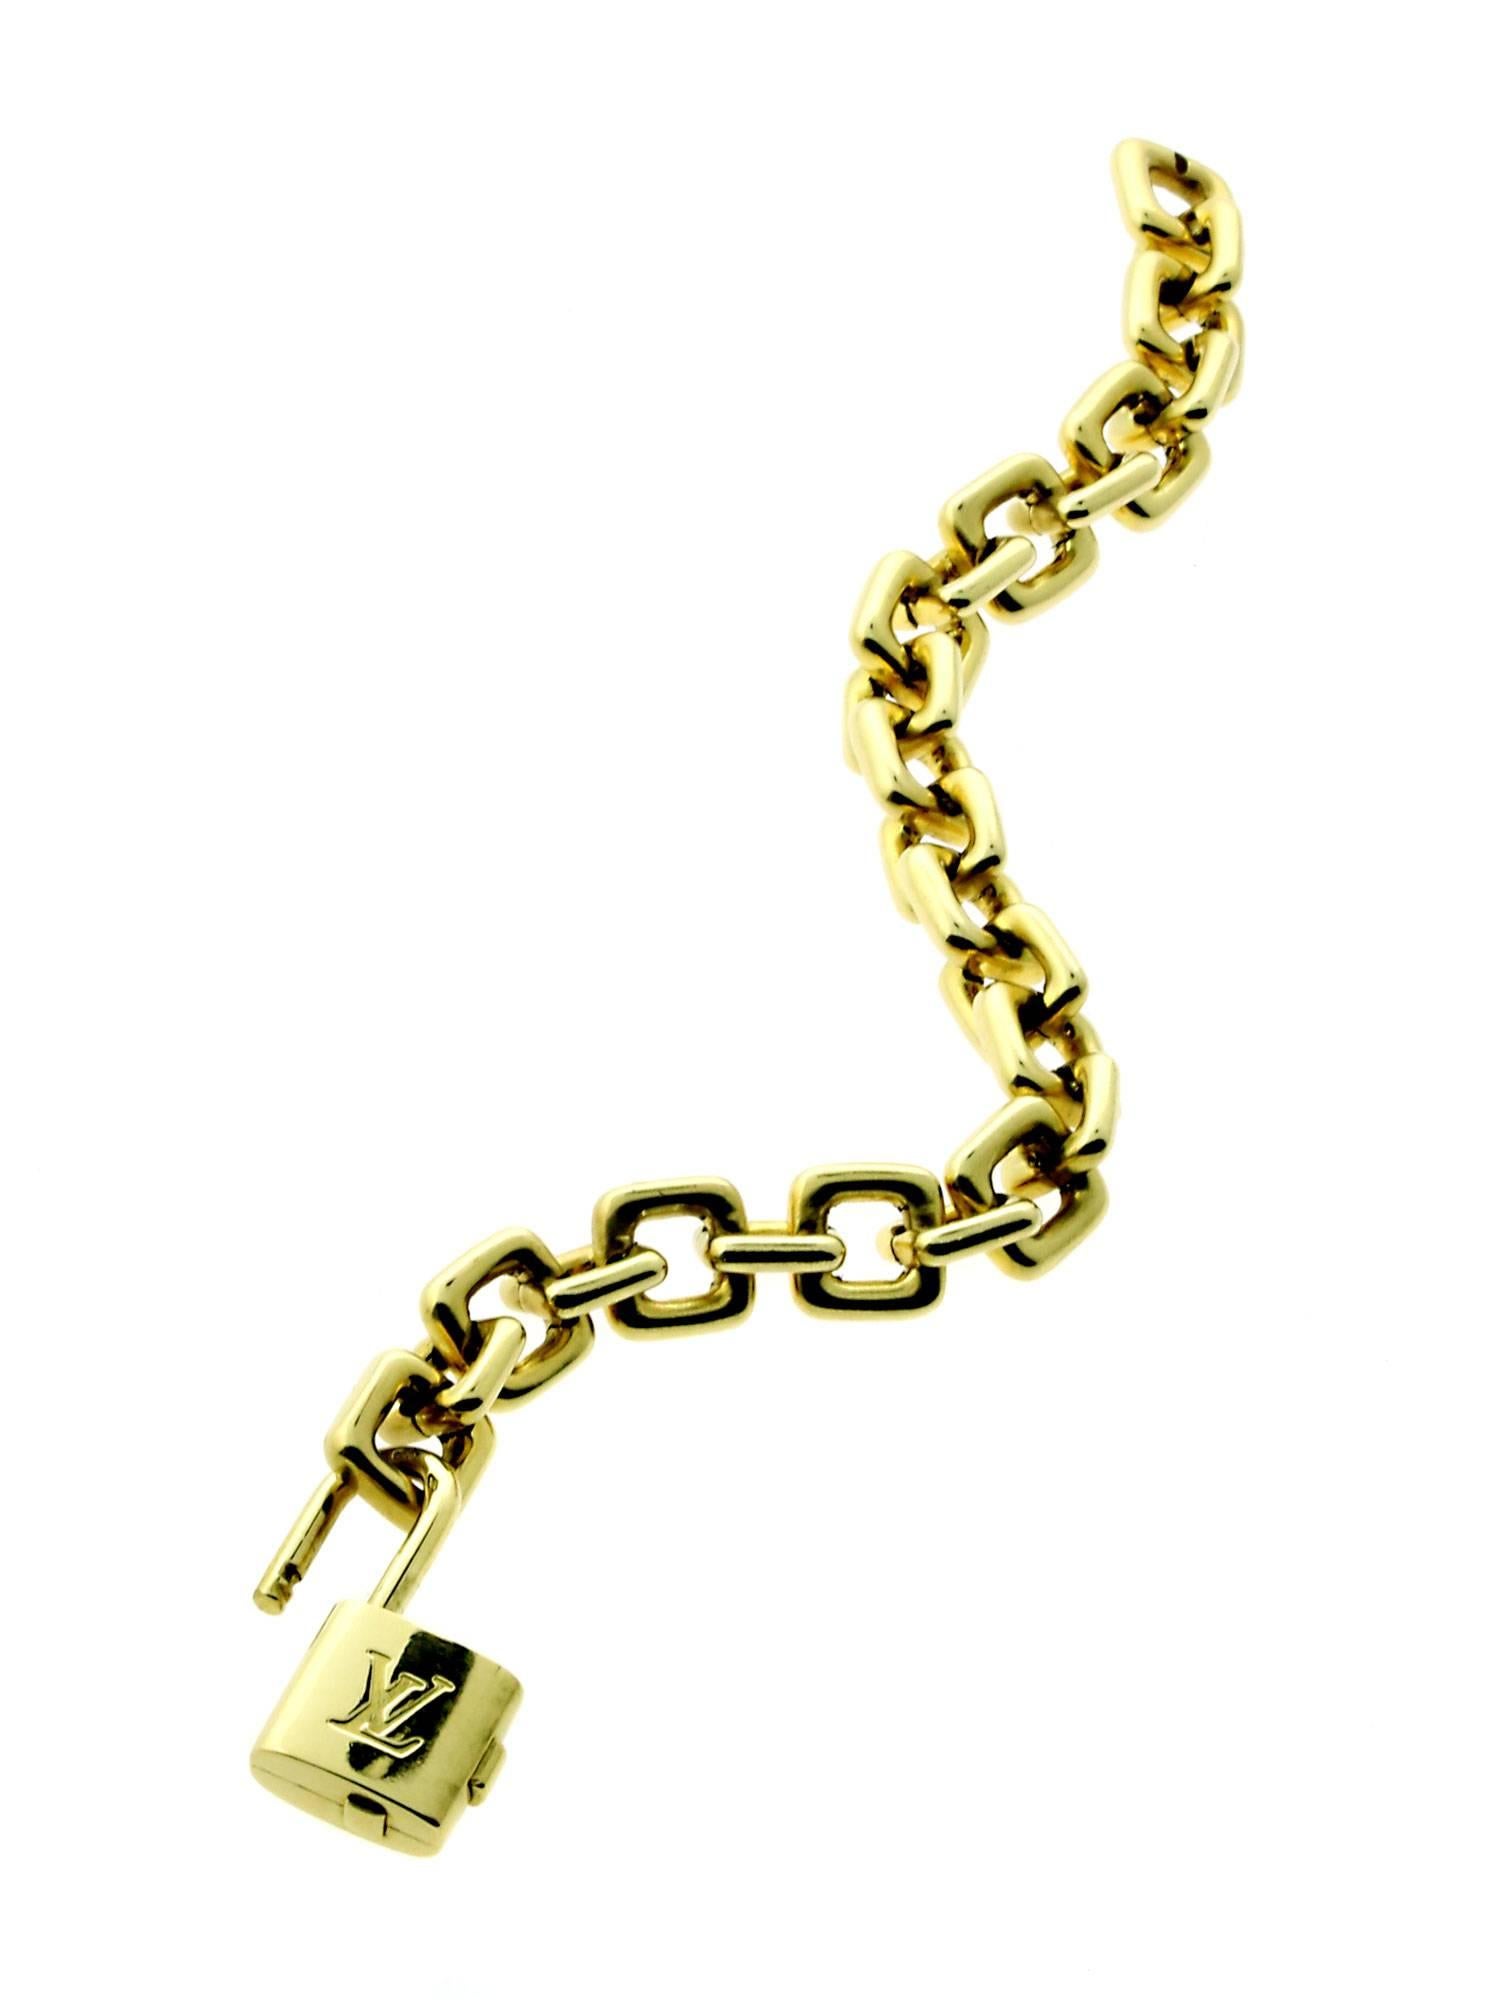 An authentic Louis Vuitton Padlock charm bracelet in 18k yellow gold featuring a functional padlock.

Length: 6 3/4″ Adjustable

Inventory ID: 0000183